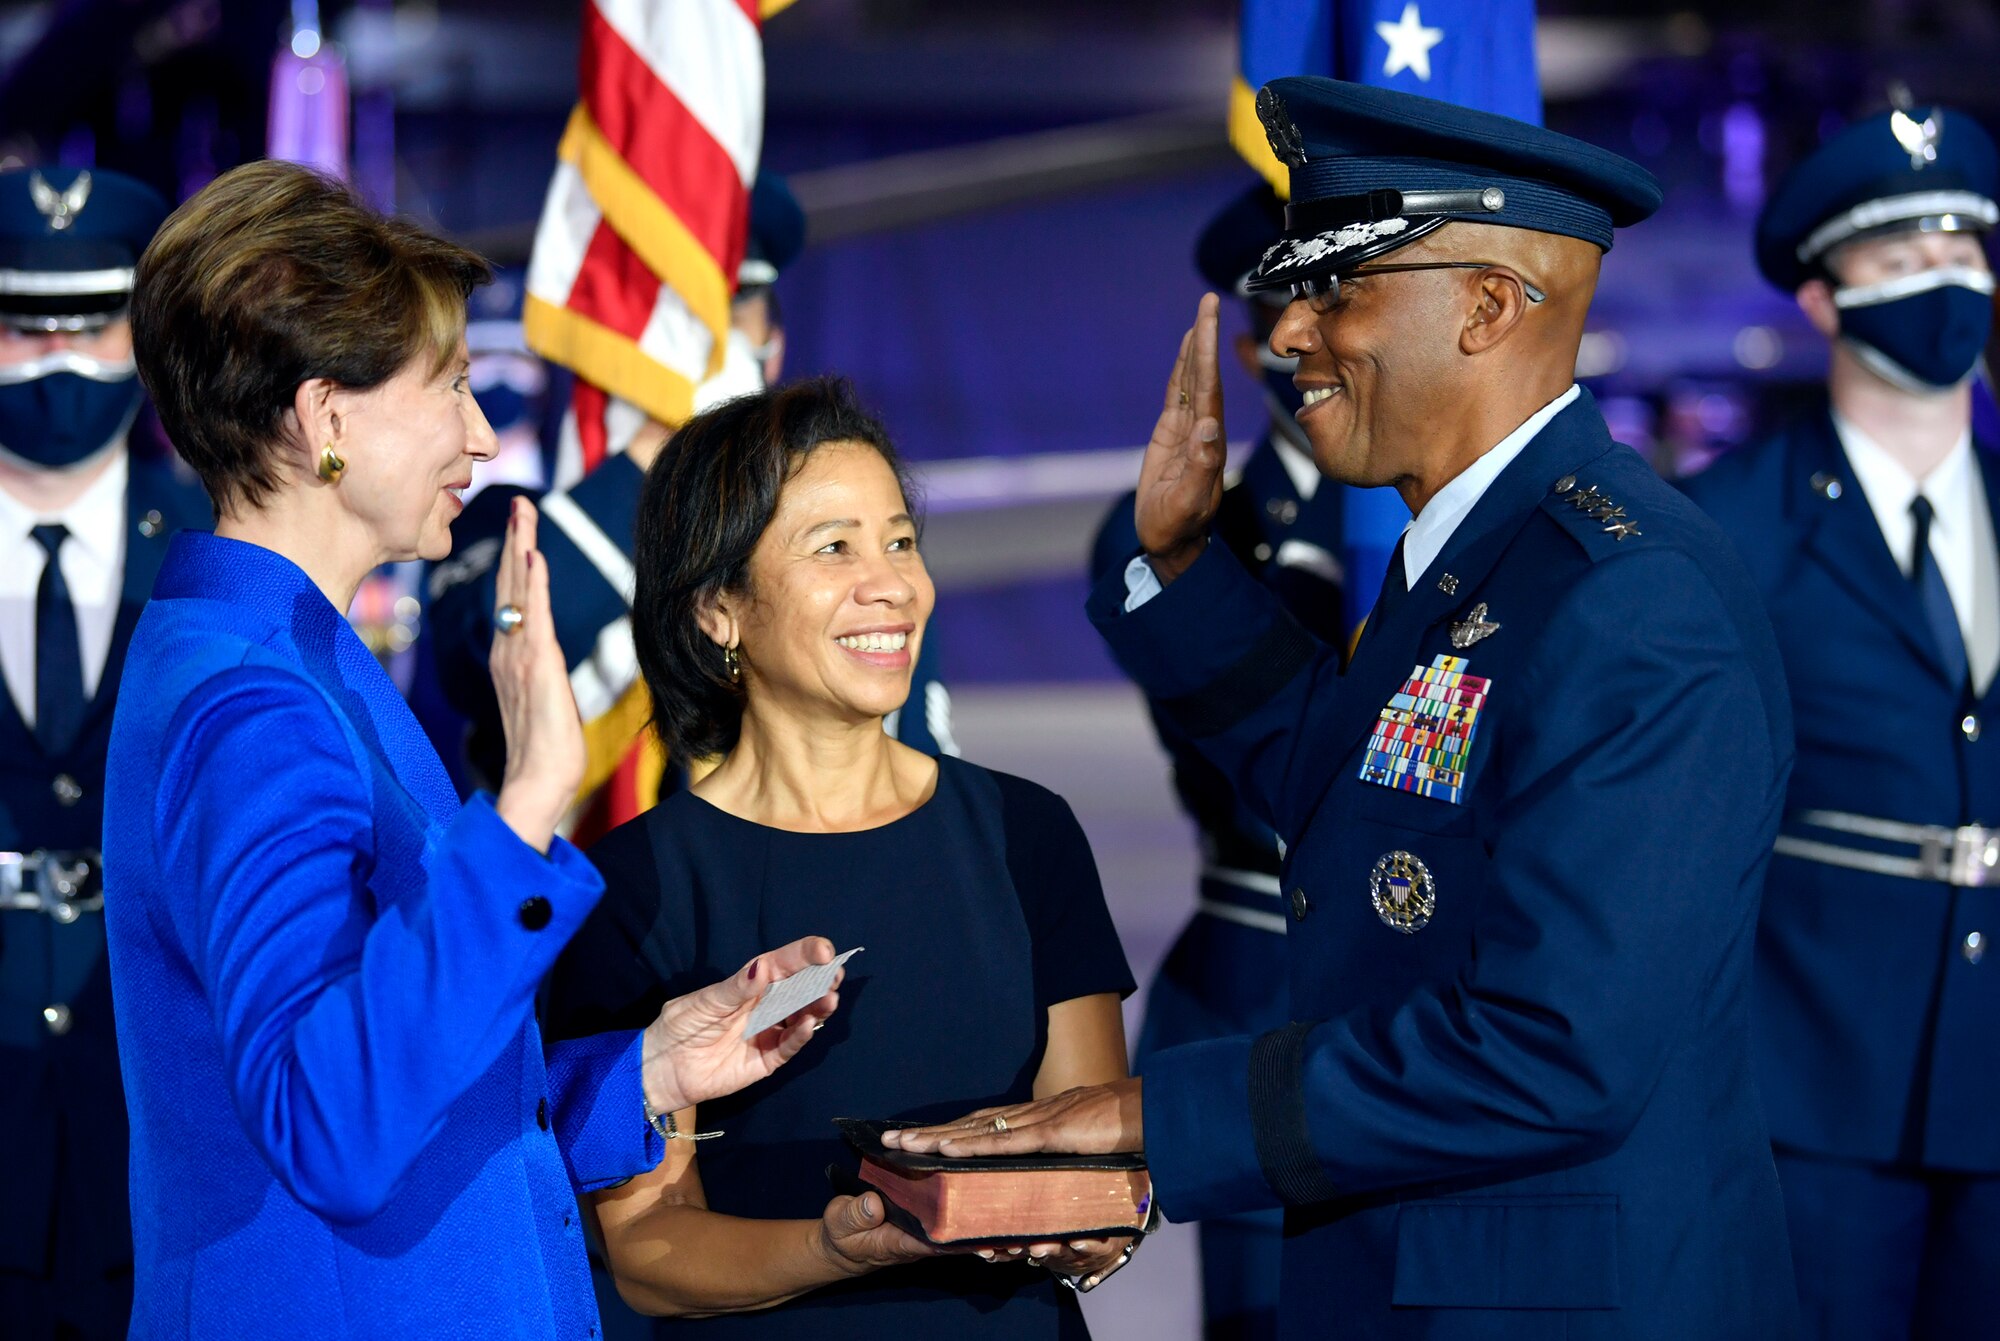 Secretary of the Air Force Barbara M. Barrett administers the oath of office to incoming Air Force Chief of Staff Gen. Charles Q. Brown Jr. during the CSAF change of responsibility ceremony at Joint Base Andrews, Md., Aug. 6, 2020. Brown is the 22nd Chief of Staff of the Air Force. (U.S. Air Force photo by Wayne Clark)